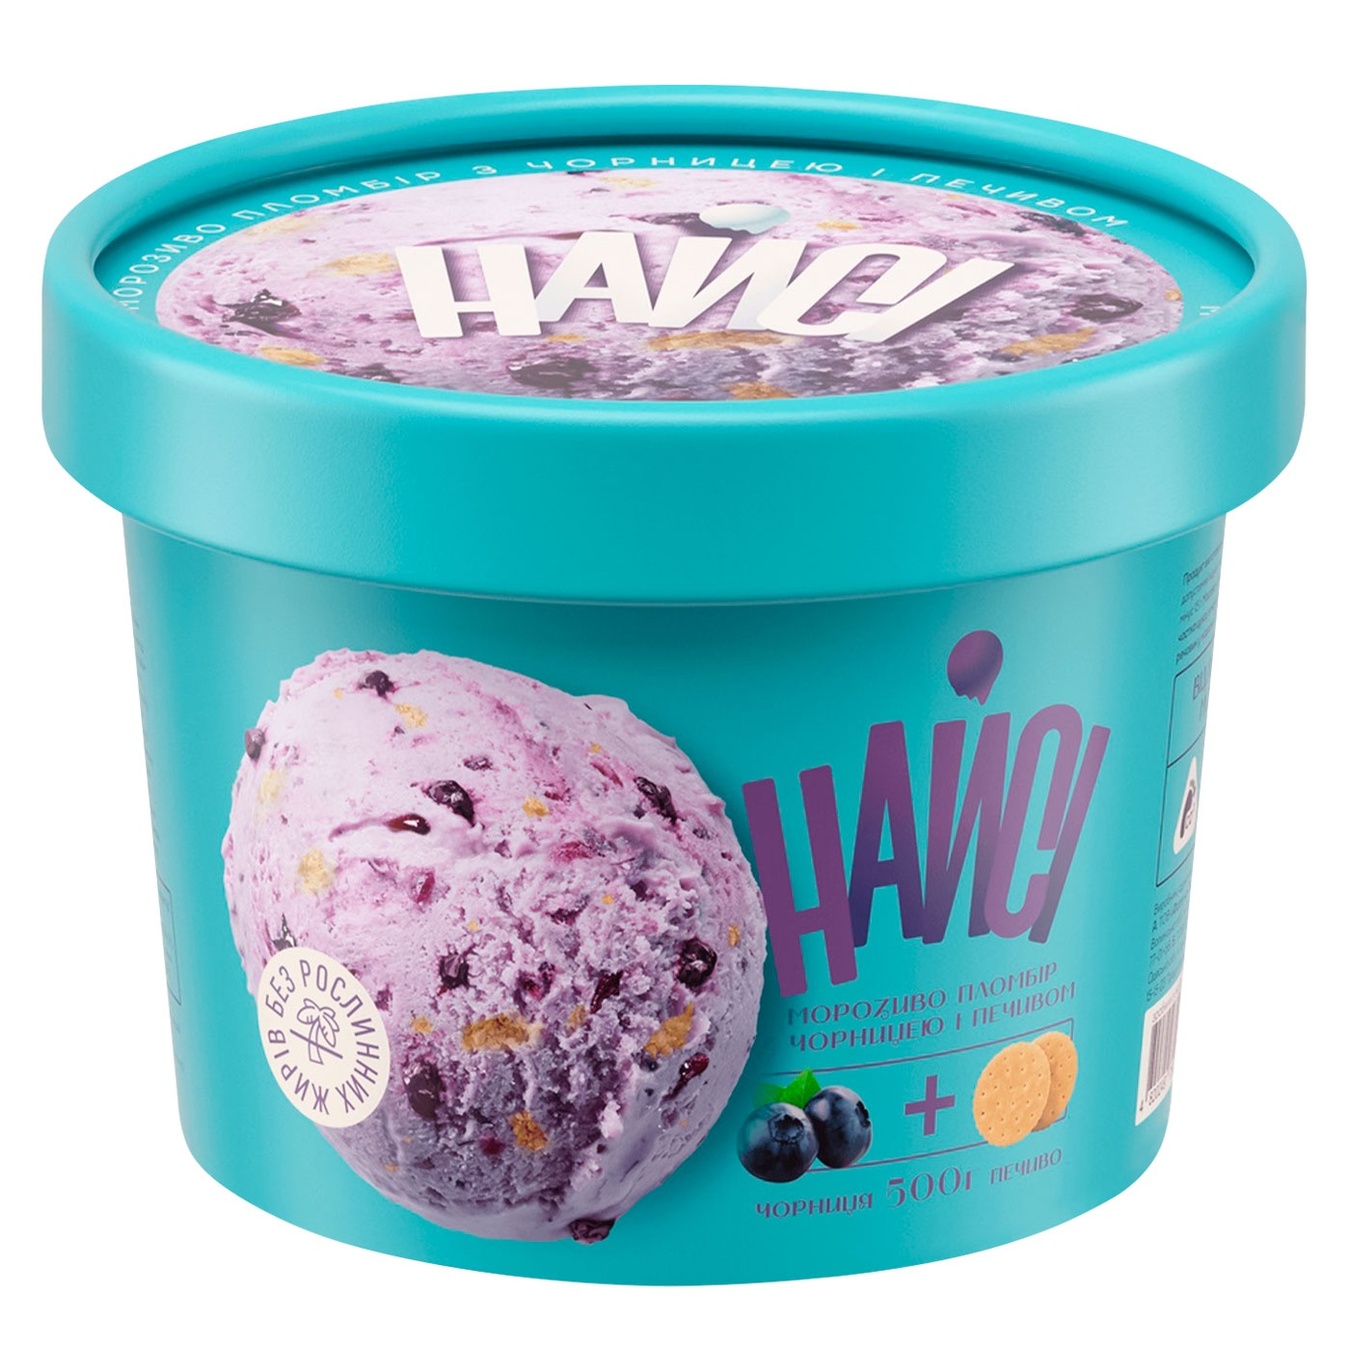 Naisi blueberry-biscuit ice cream 500g glass